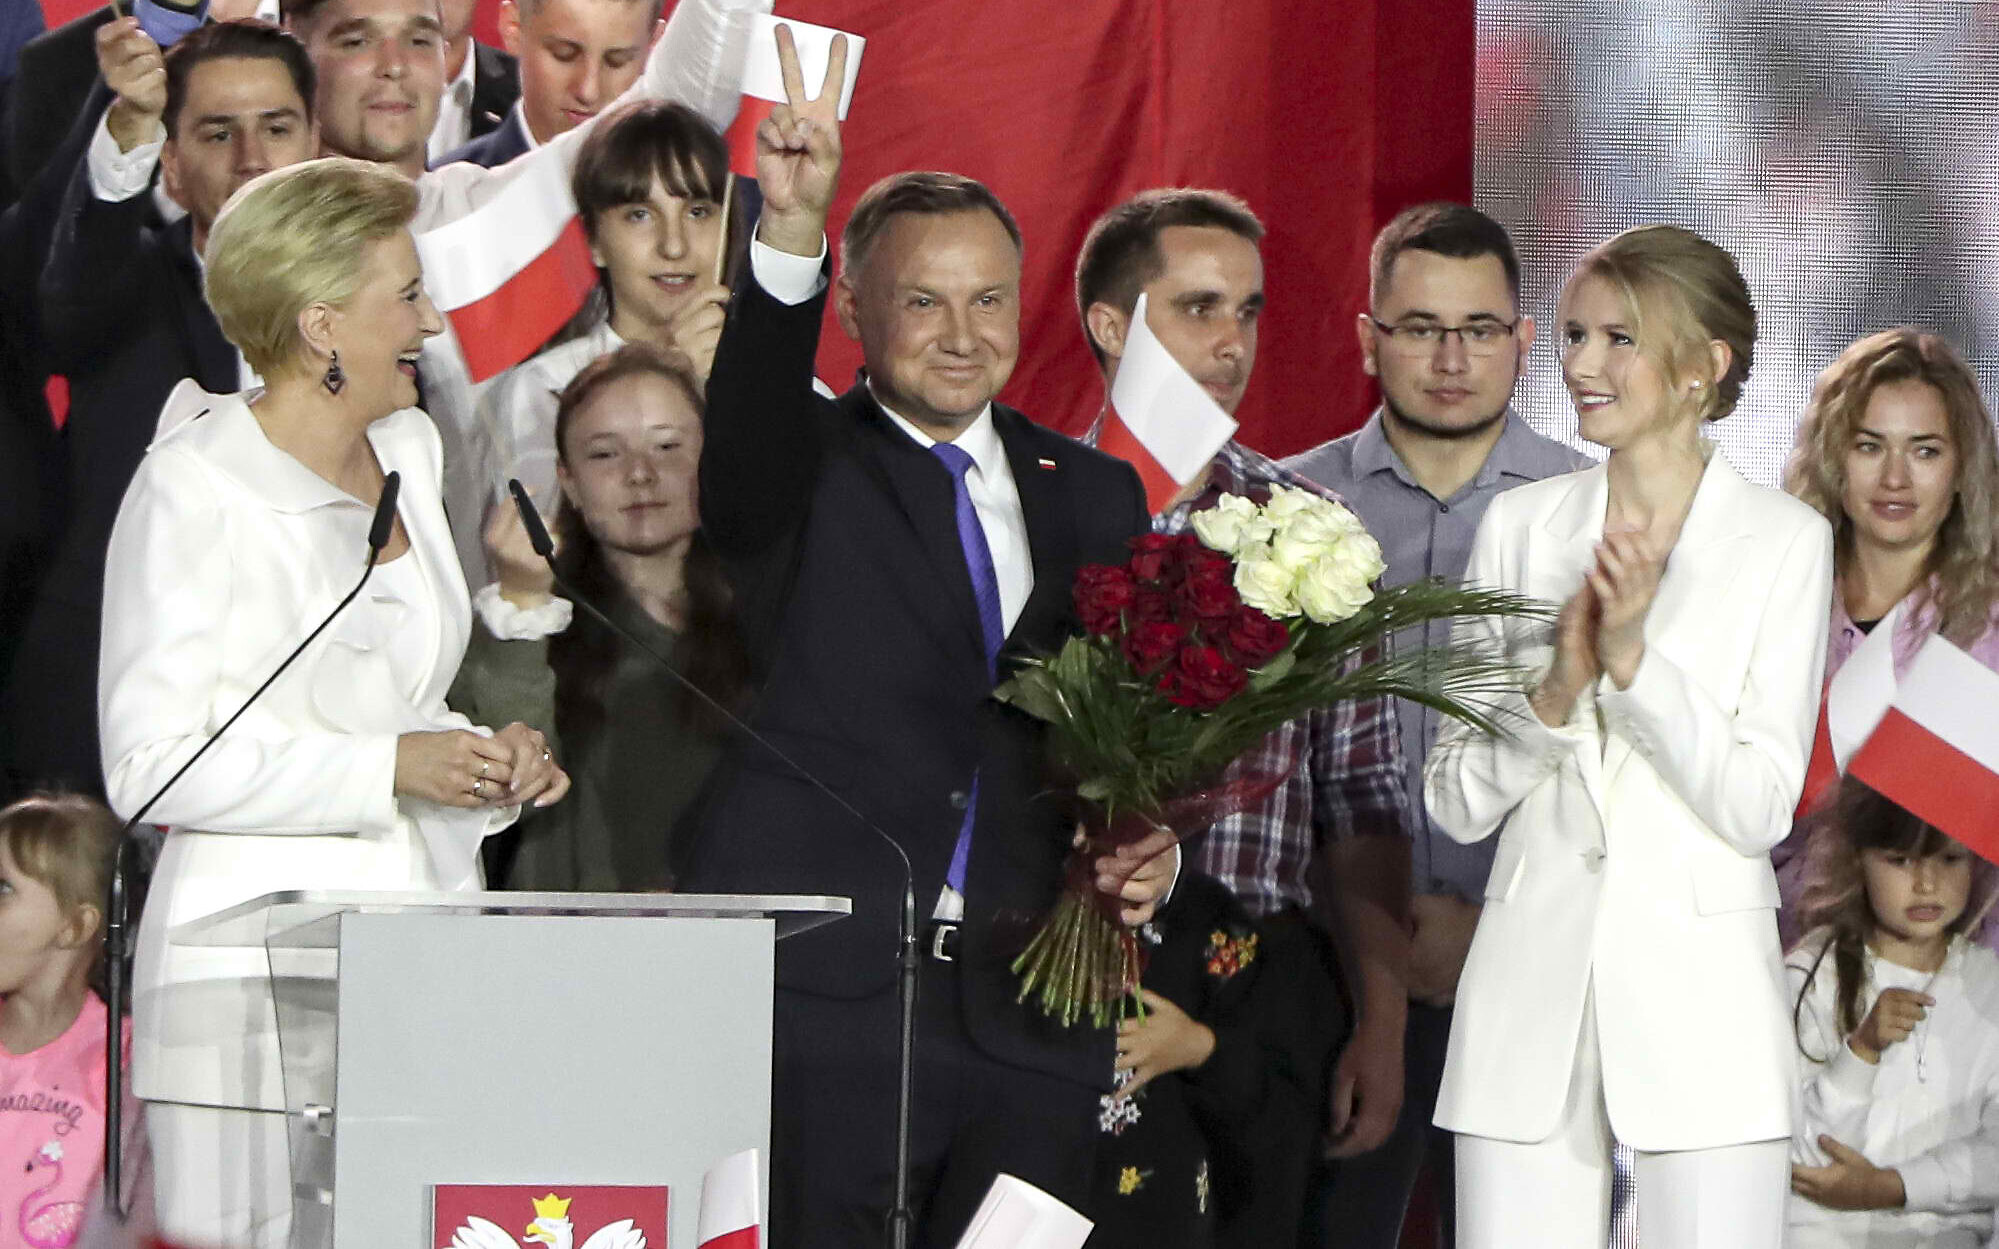 Conservative Polish President Duda Wins 2nd Term After Tight Race The Times Of Israel